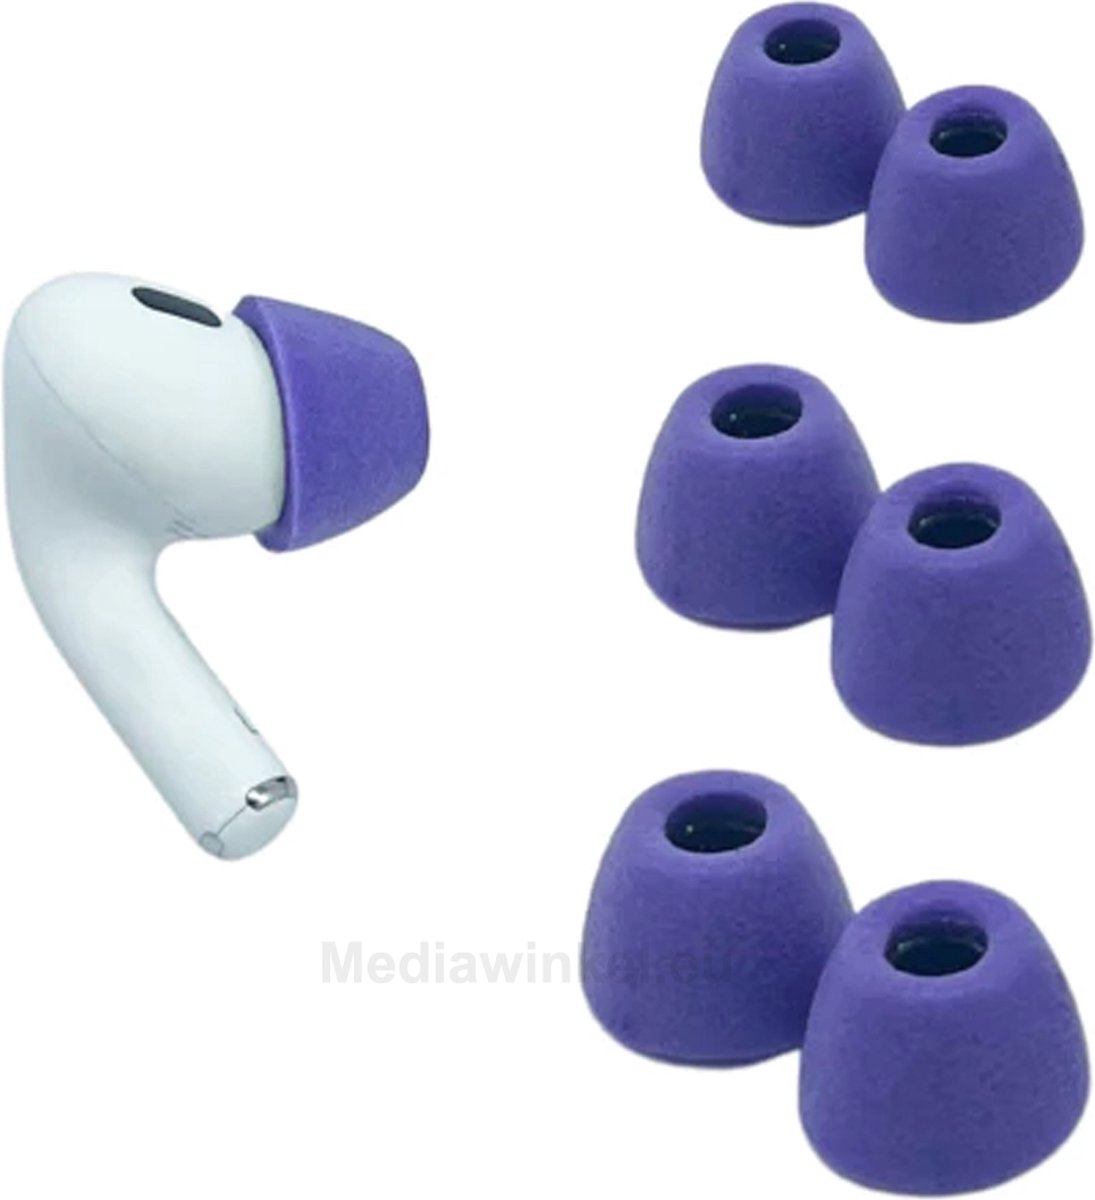 Comply Foam Tips 2.0 voor AirPods Pro, size: medium, Lilac